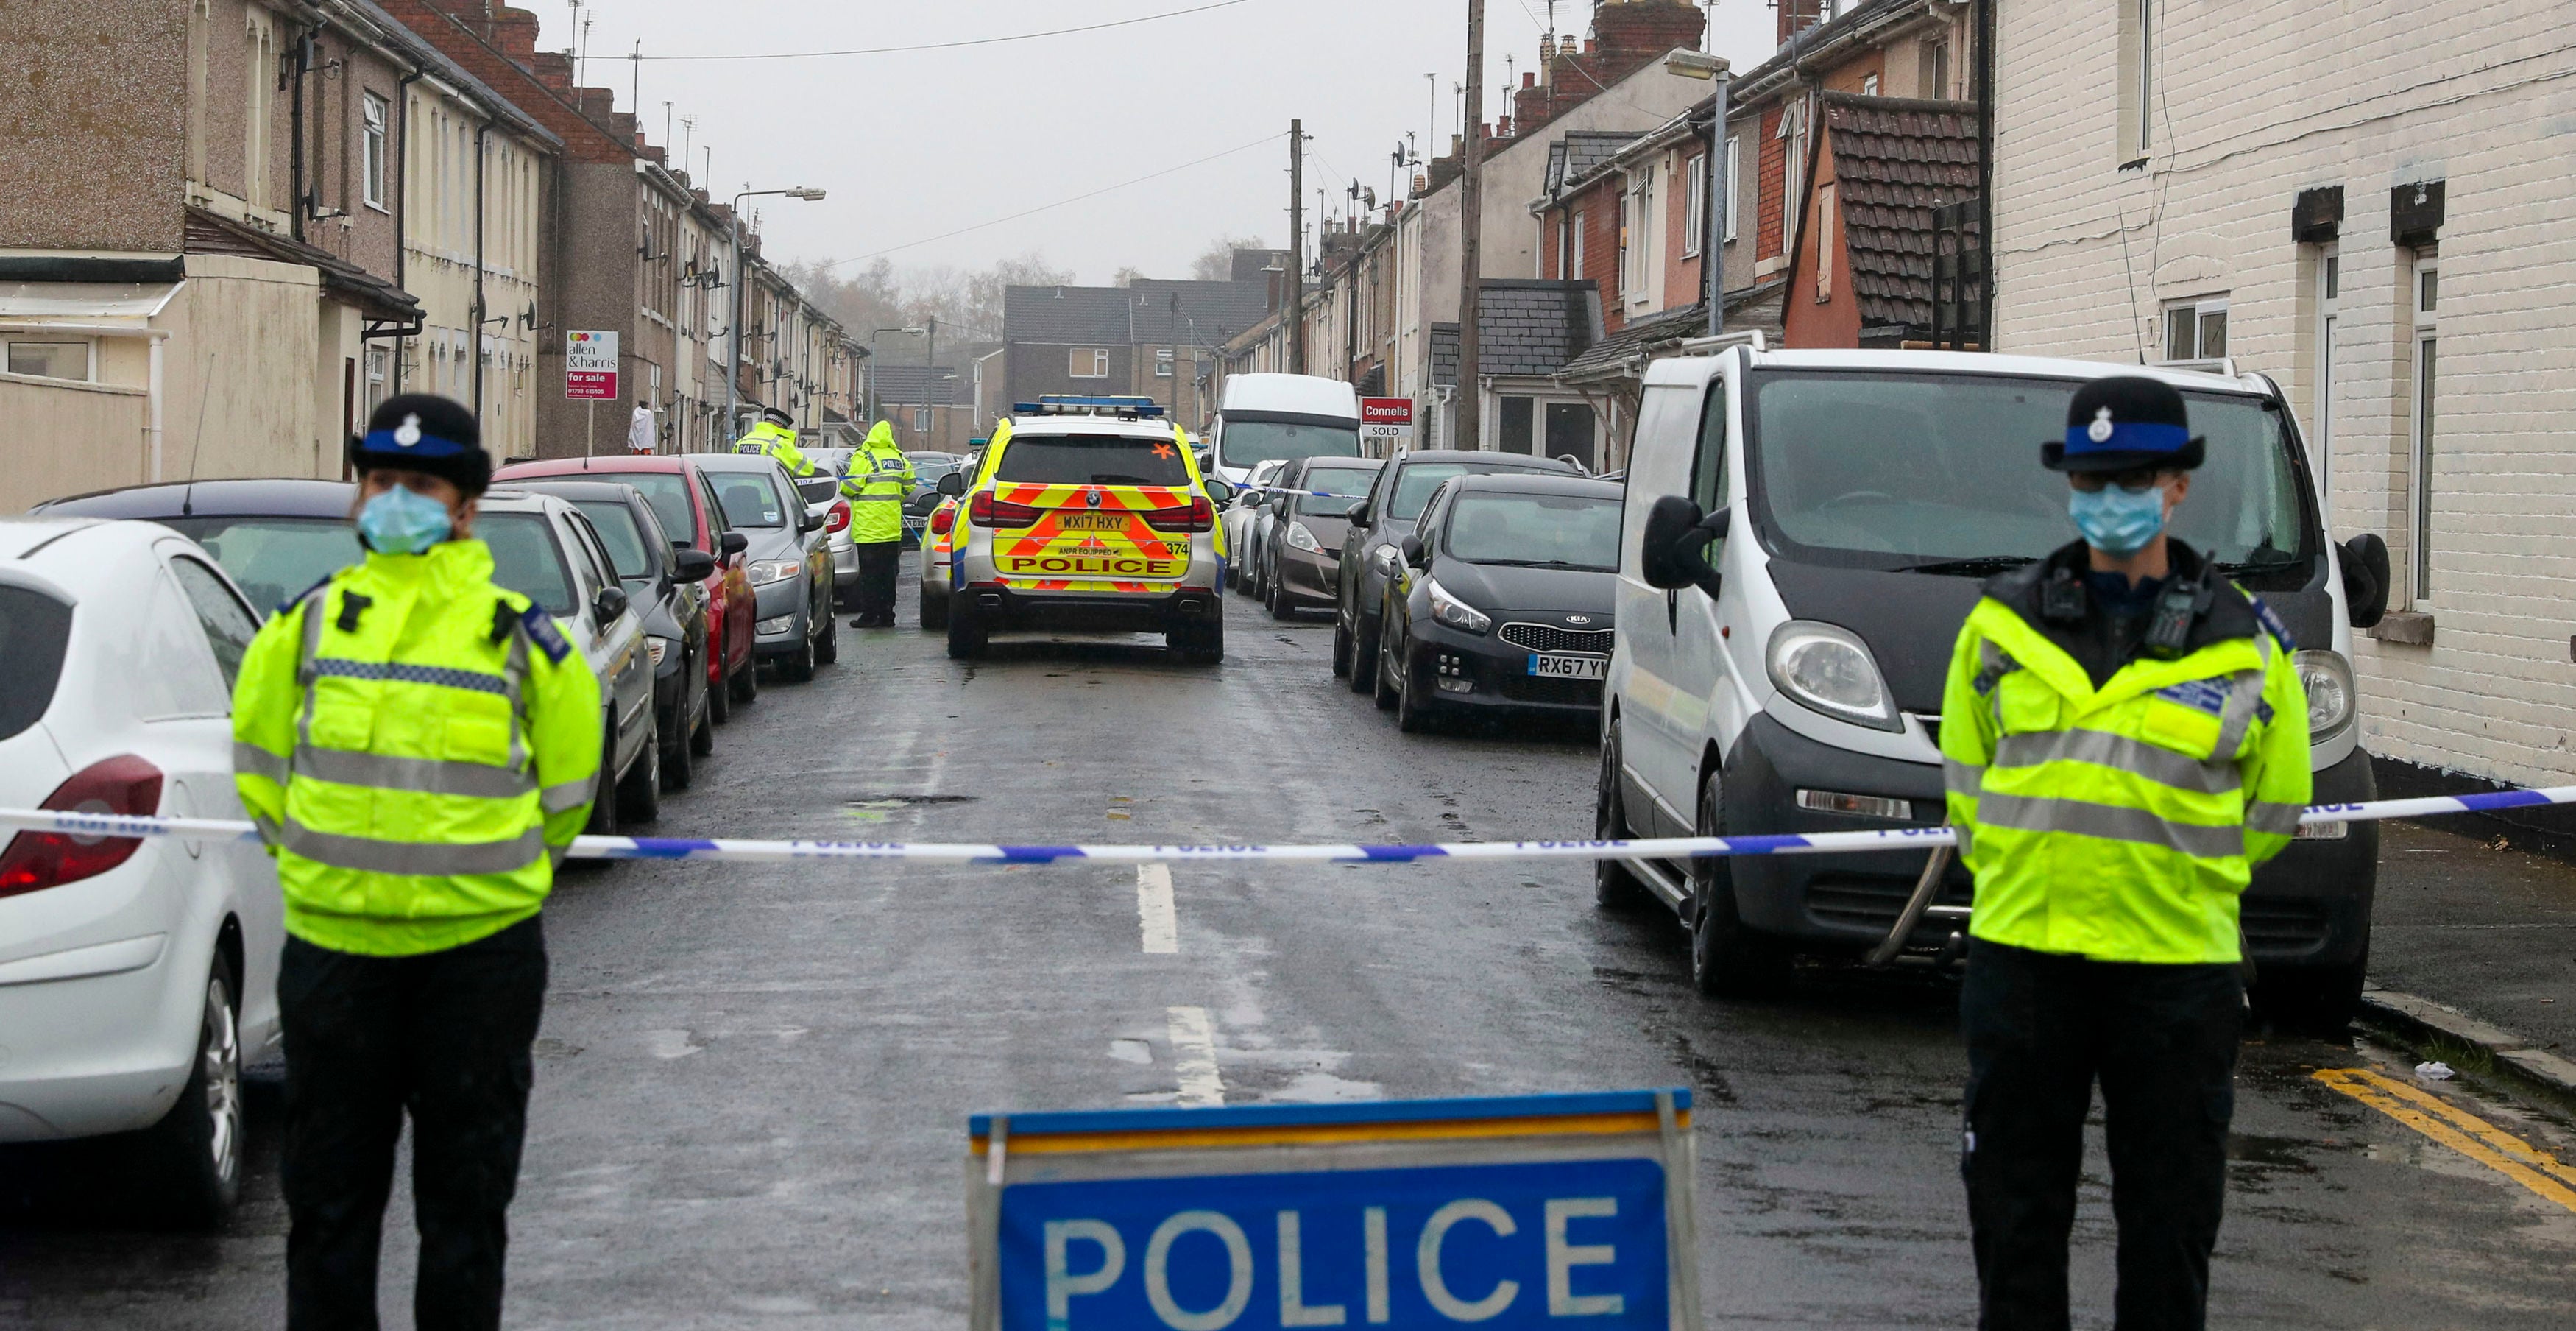 Swindon Shooting Iopc Investigating After Man Shot Dead By Police Officer The Independent